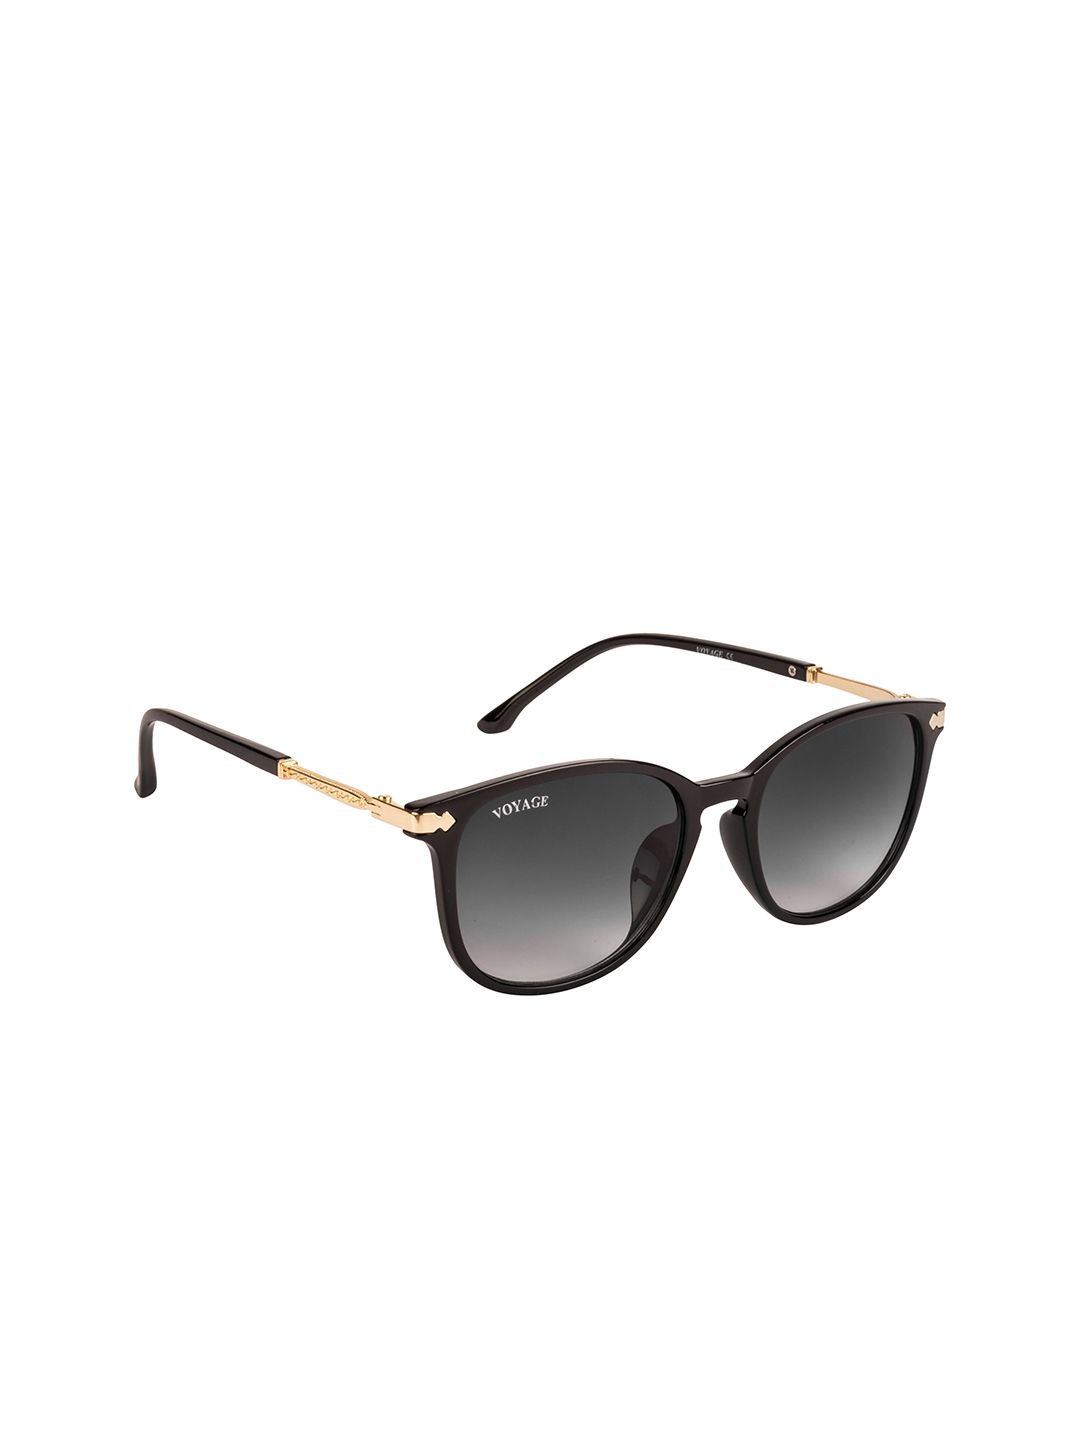 Voyage Women Black Lens & Wayfarer Sunglasses with UV Protected Lens Price in India